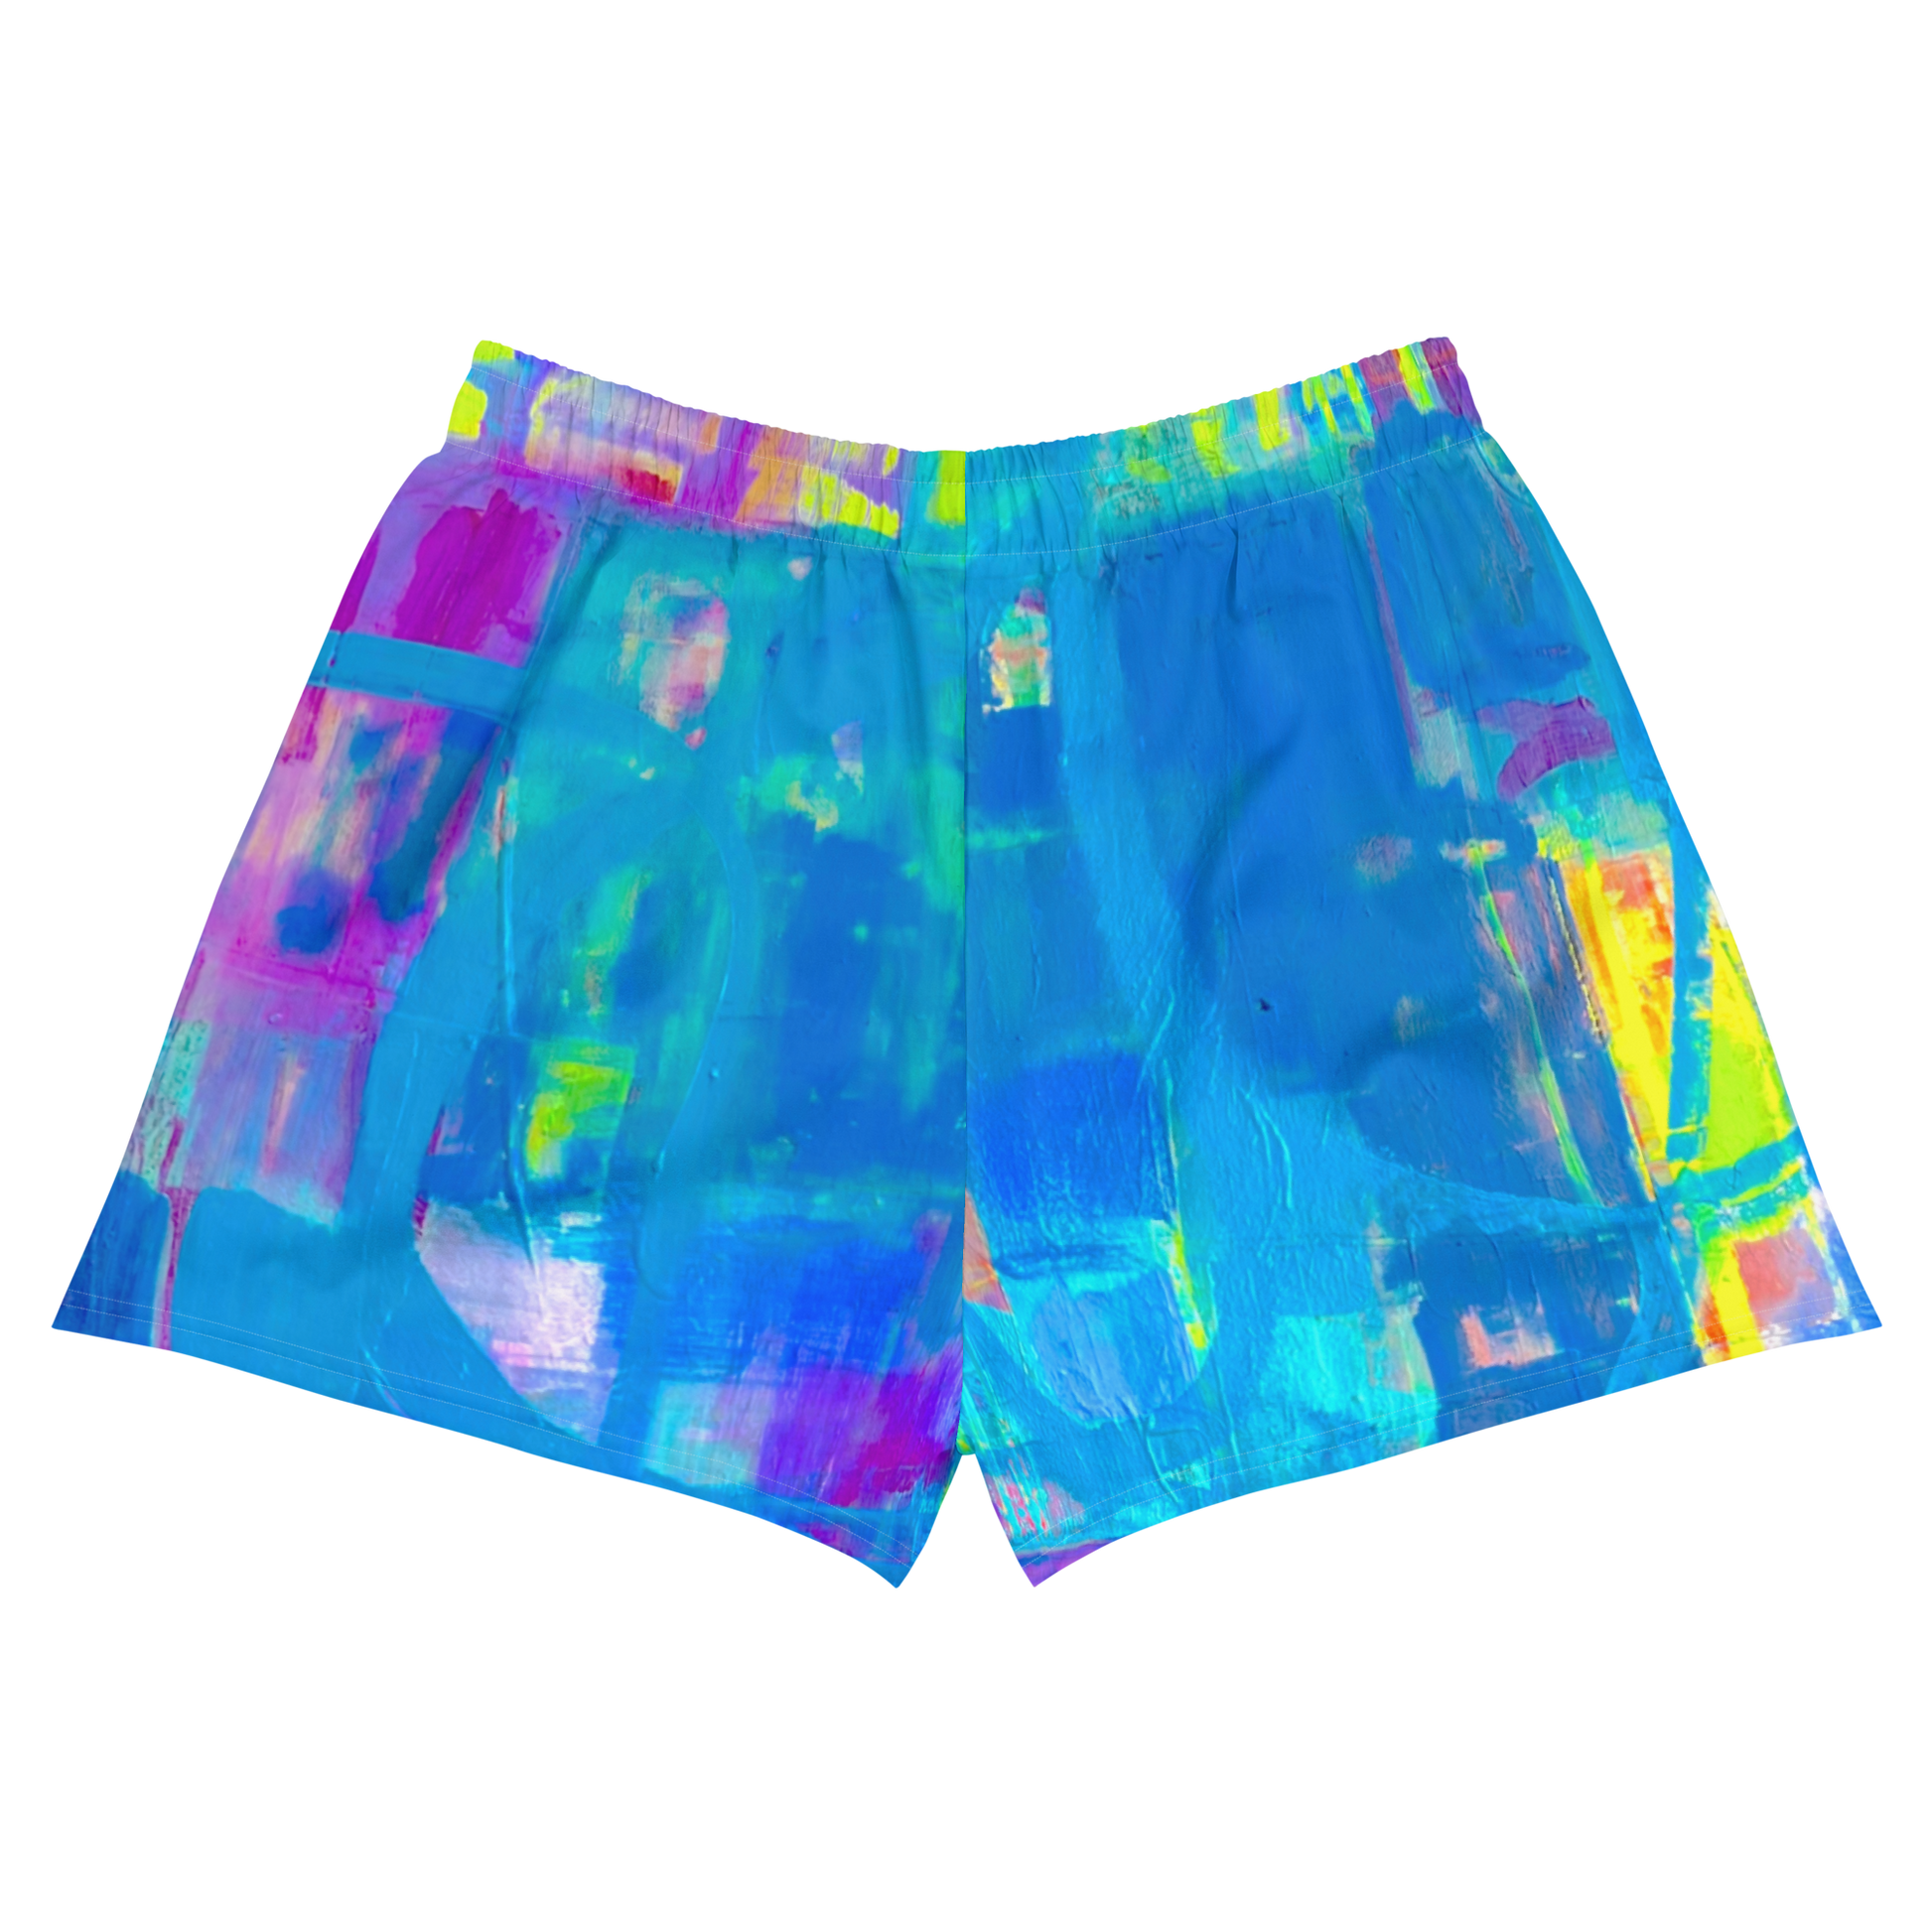 Coloring the Motion - Women’s Recycled Athletic Shorts